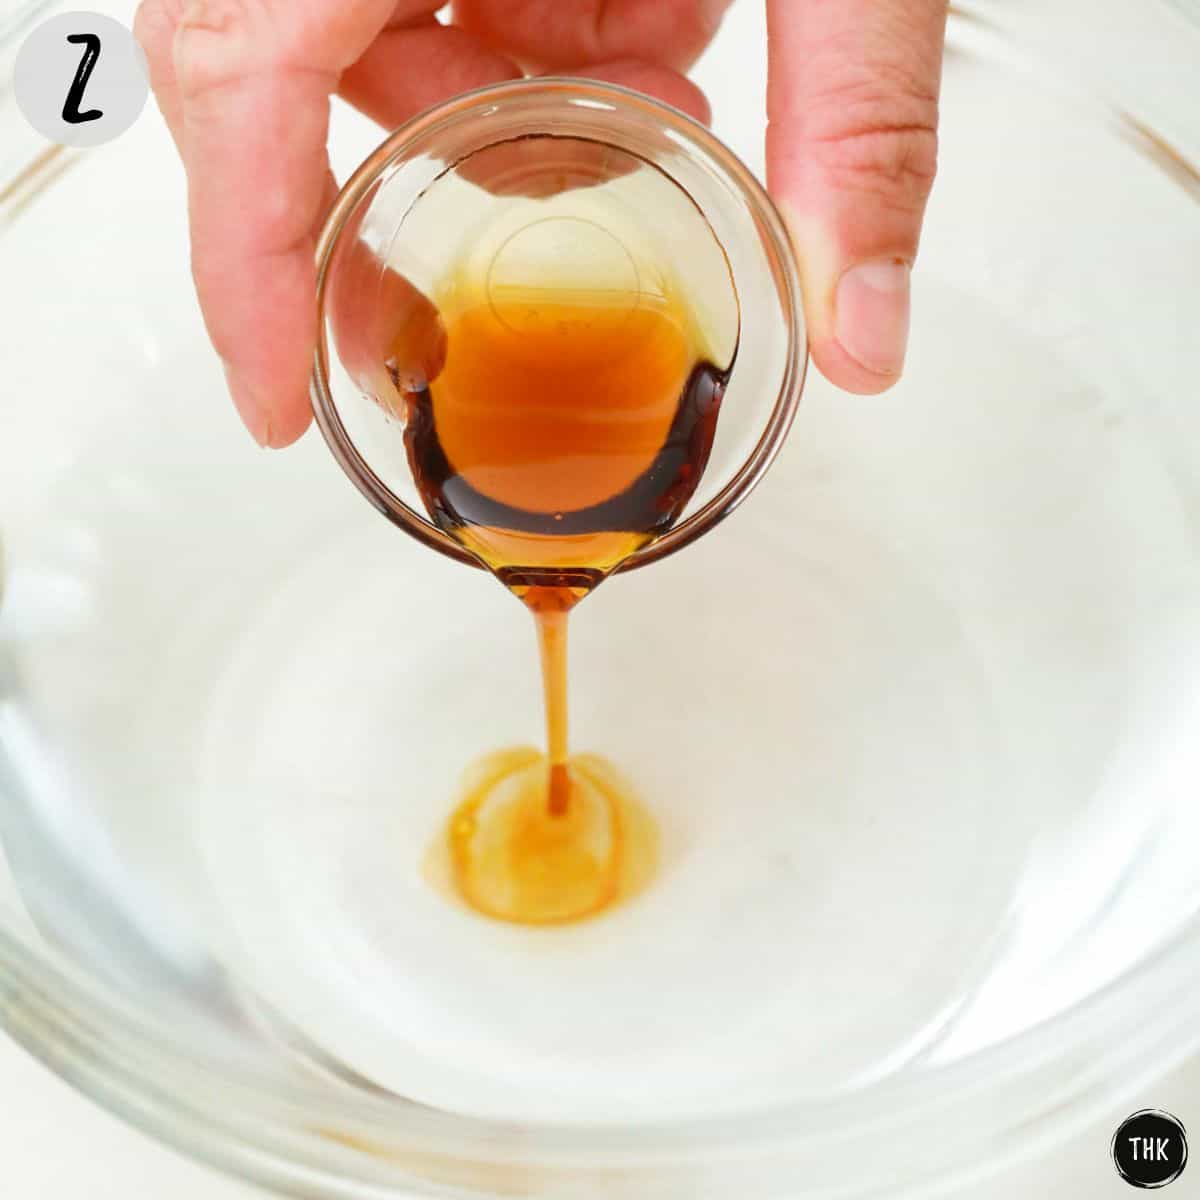 Maple syrup being poured into bowl of water.